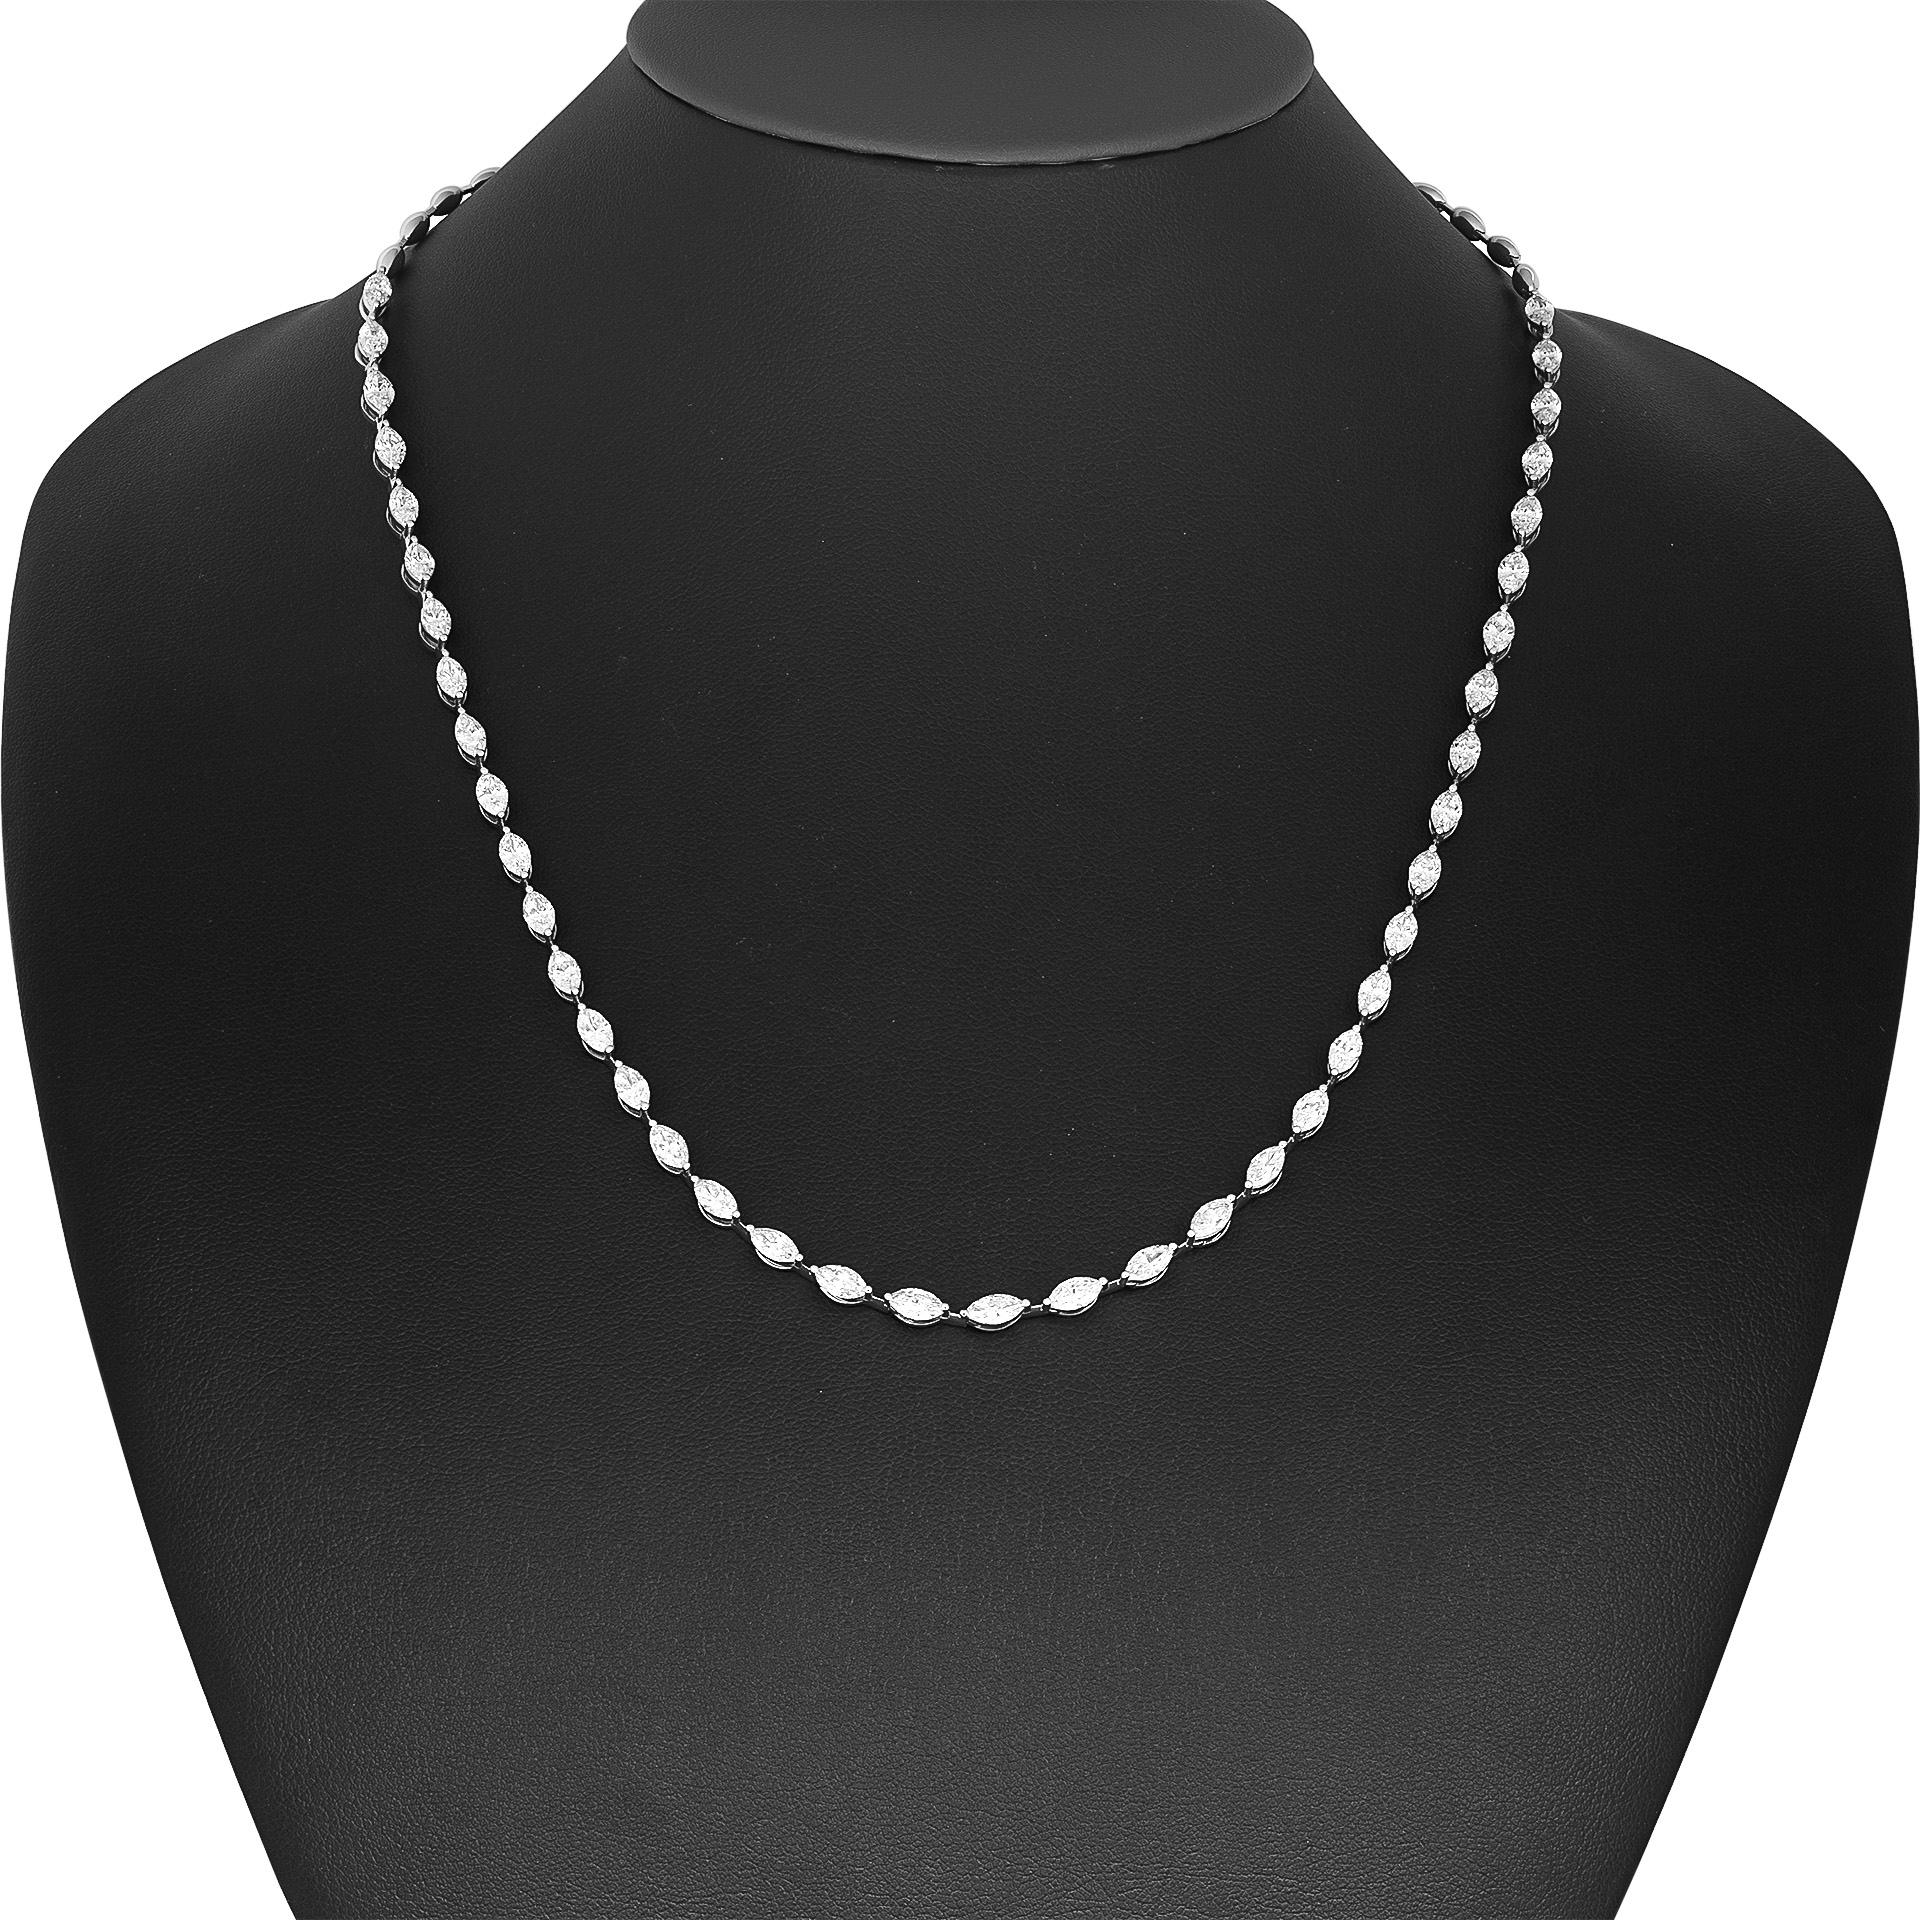 East-West Marquise tennis necklace in 14K White Gold
40 diamonds totaling 7.78ct G/H Color & VS clarity
16 inches